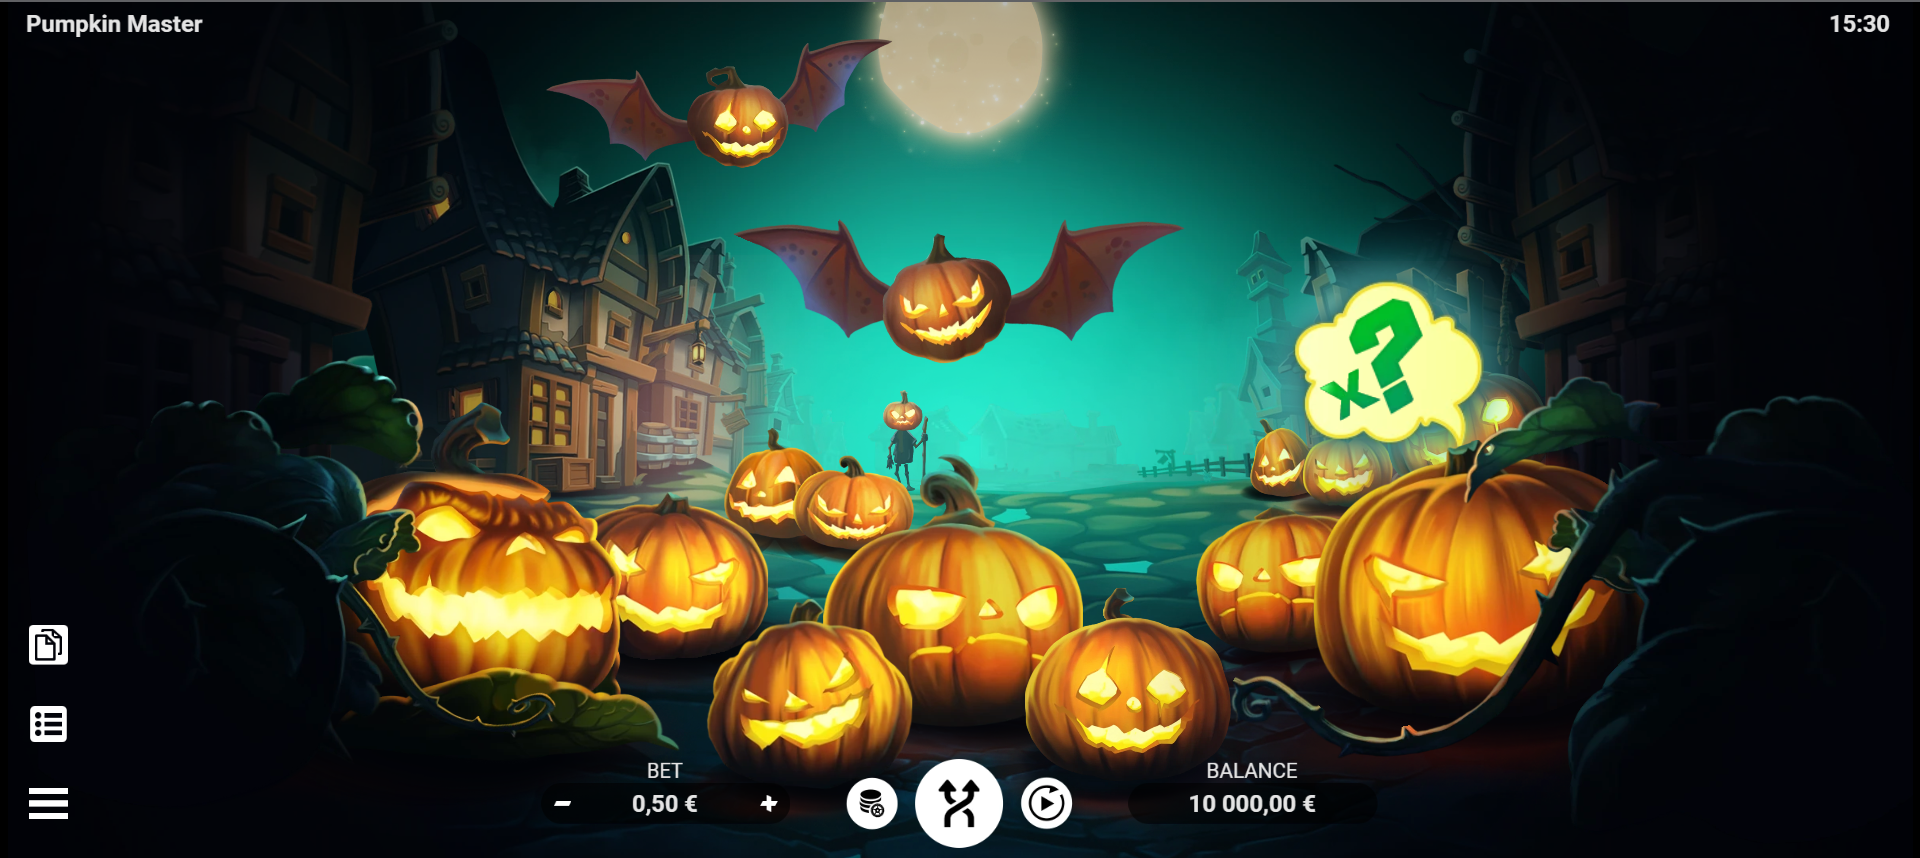 Pumpkin Master by Evoplay | Play Game Demo Online